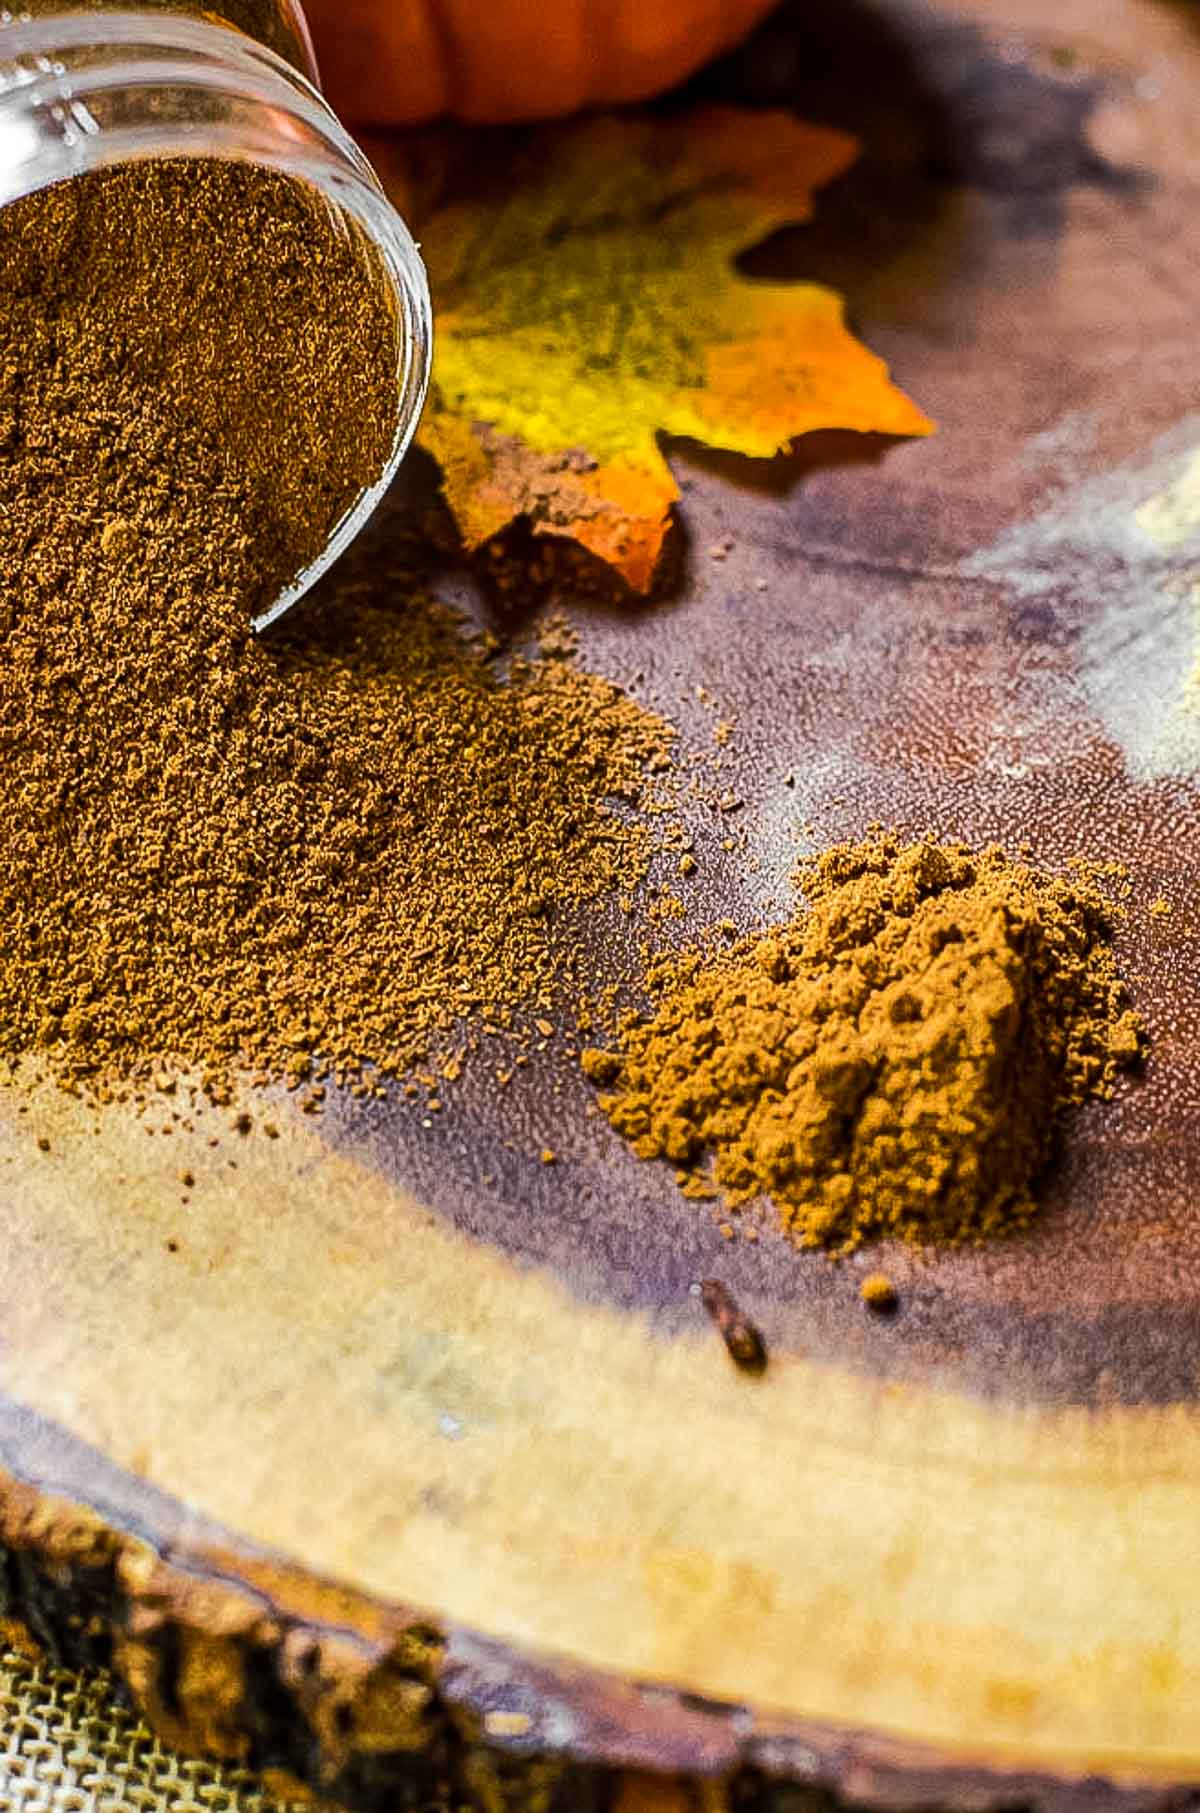 Whether you’re making a pumpkin spice latte, homemade pumpkin spice popcorn, or just plain pumpkin pie, this homemade pumpkin pie spice recipe is the best.  There are so many uses, from desserts to muffins, cakes and cookies to smoothies.  One you know how to make your own mix at home, you'll never buy McCormick's again.  This easy homemade diy blend is a need to have for your pantry!  #autumn #fall #pumpkinspice #pumpkin #baking #recipe #gourmet #homemade #diy
